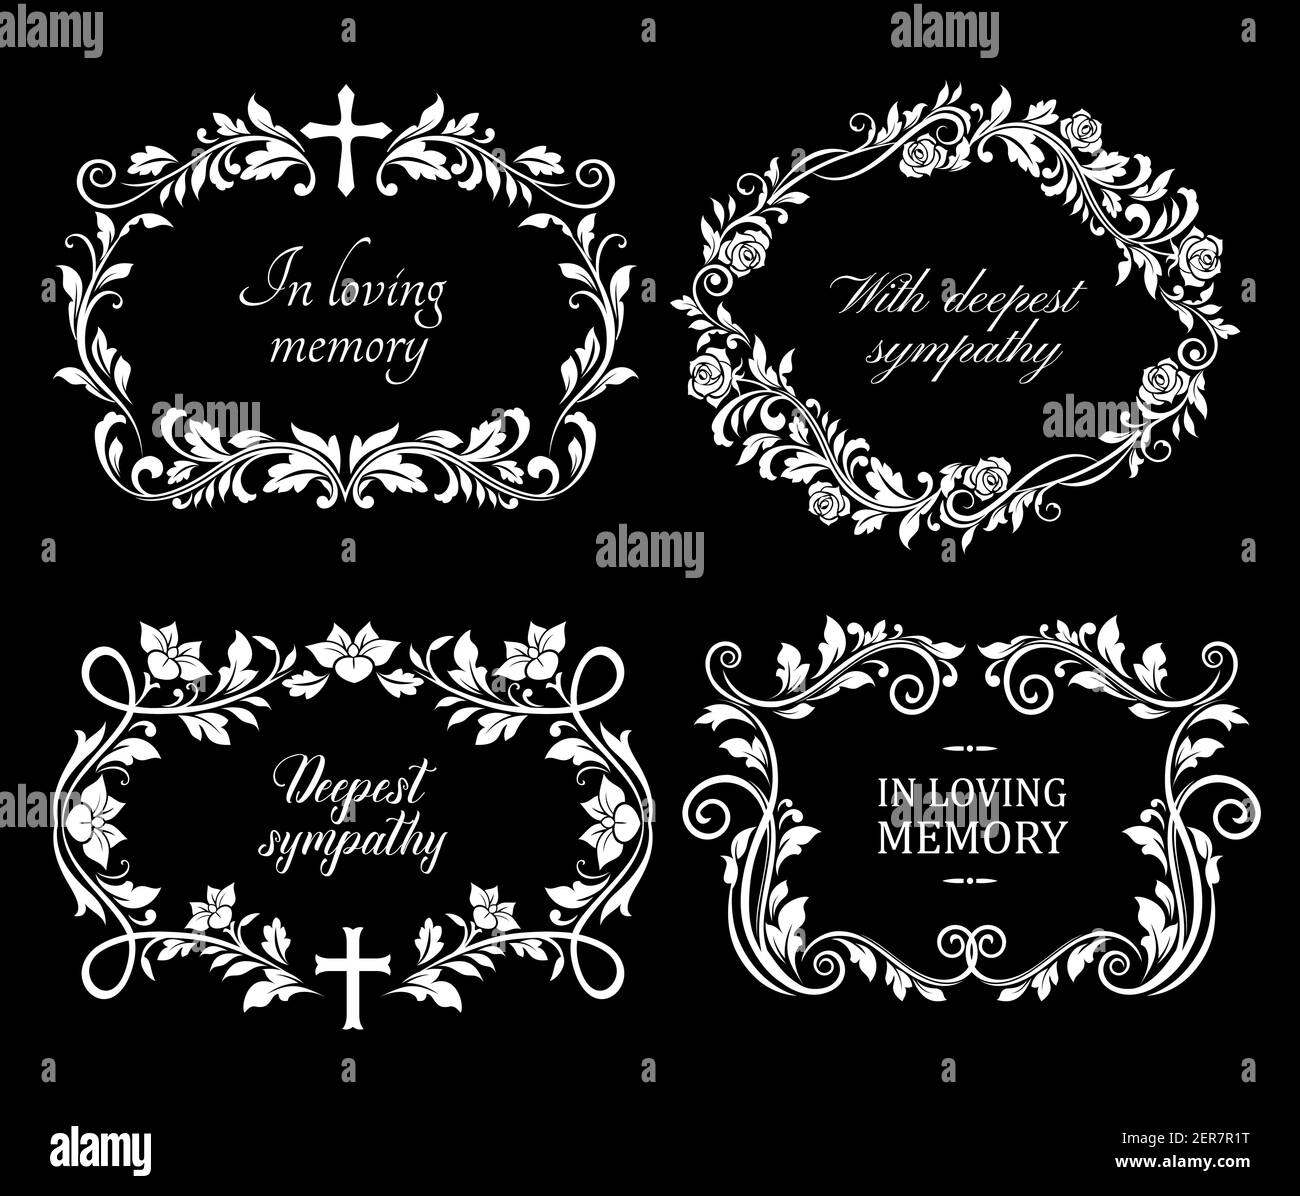 Funeral flowers wreath, condolence and death floral frames, vector RIP ribbons. Deepest sympathy and In loving memory, funeral and obituary card or me Stock Vector